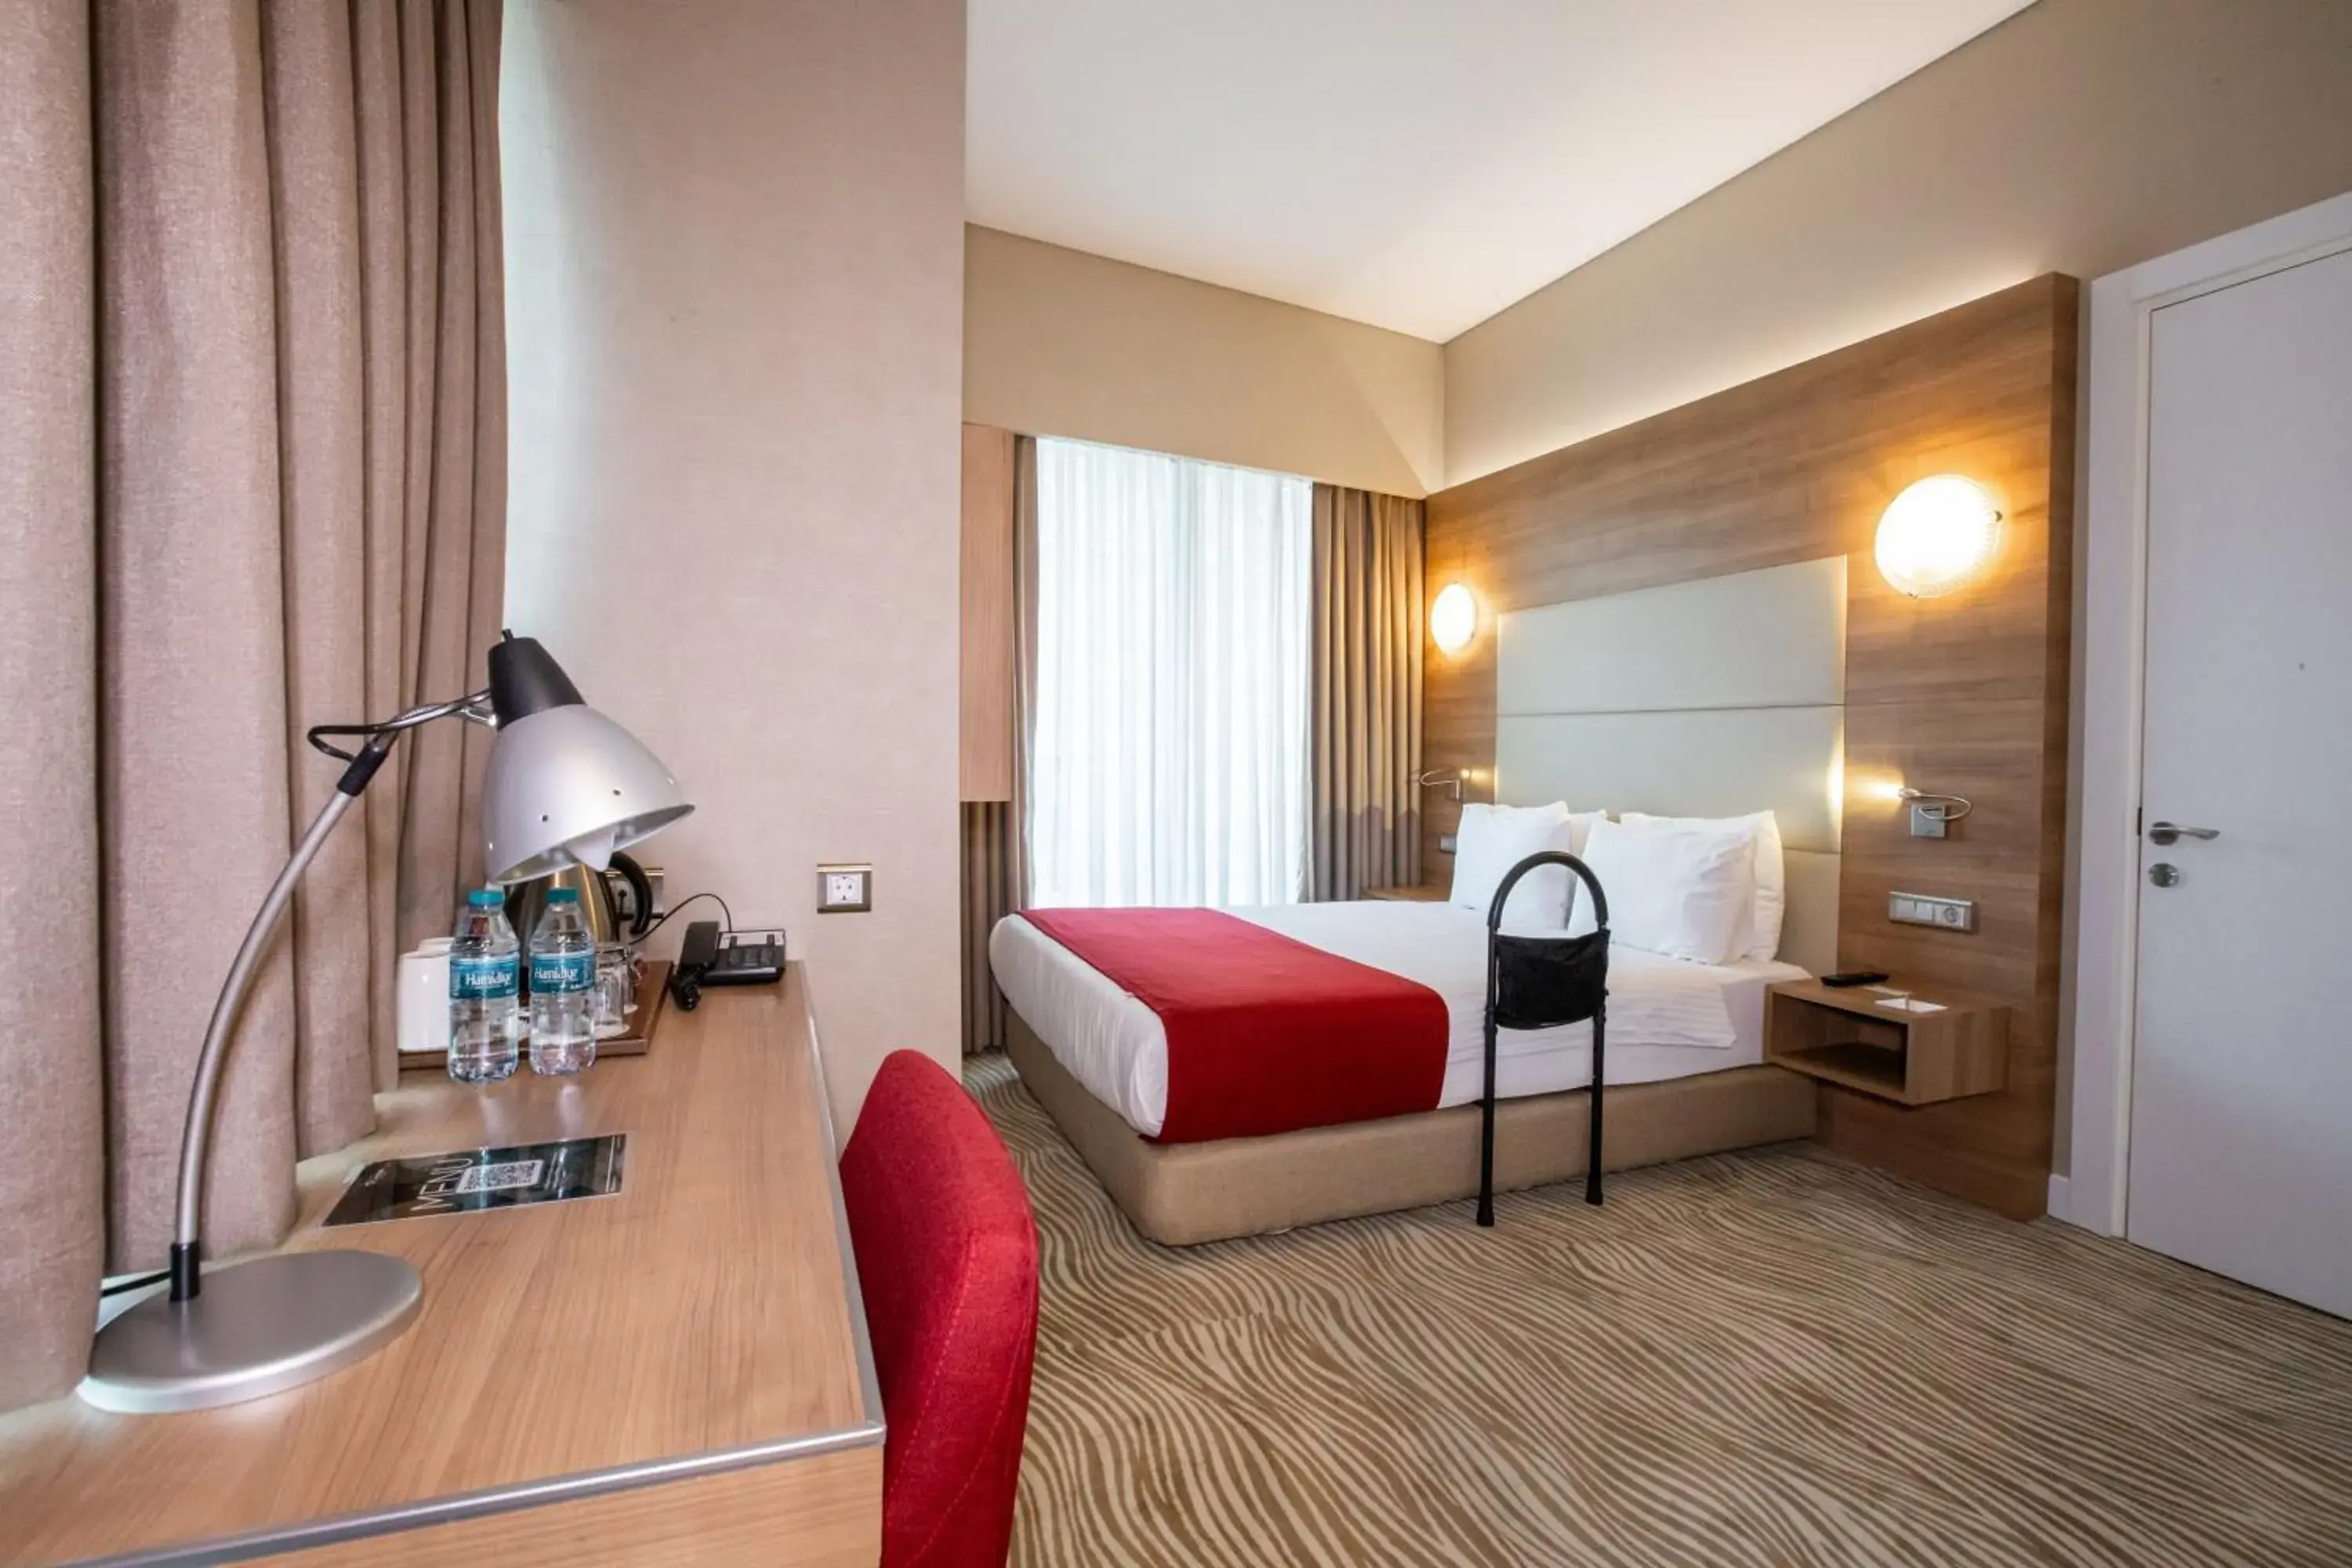 Facility for disabled guests in Ramada Encore Istanbul Kartal